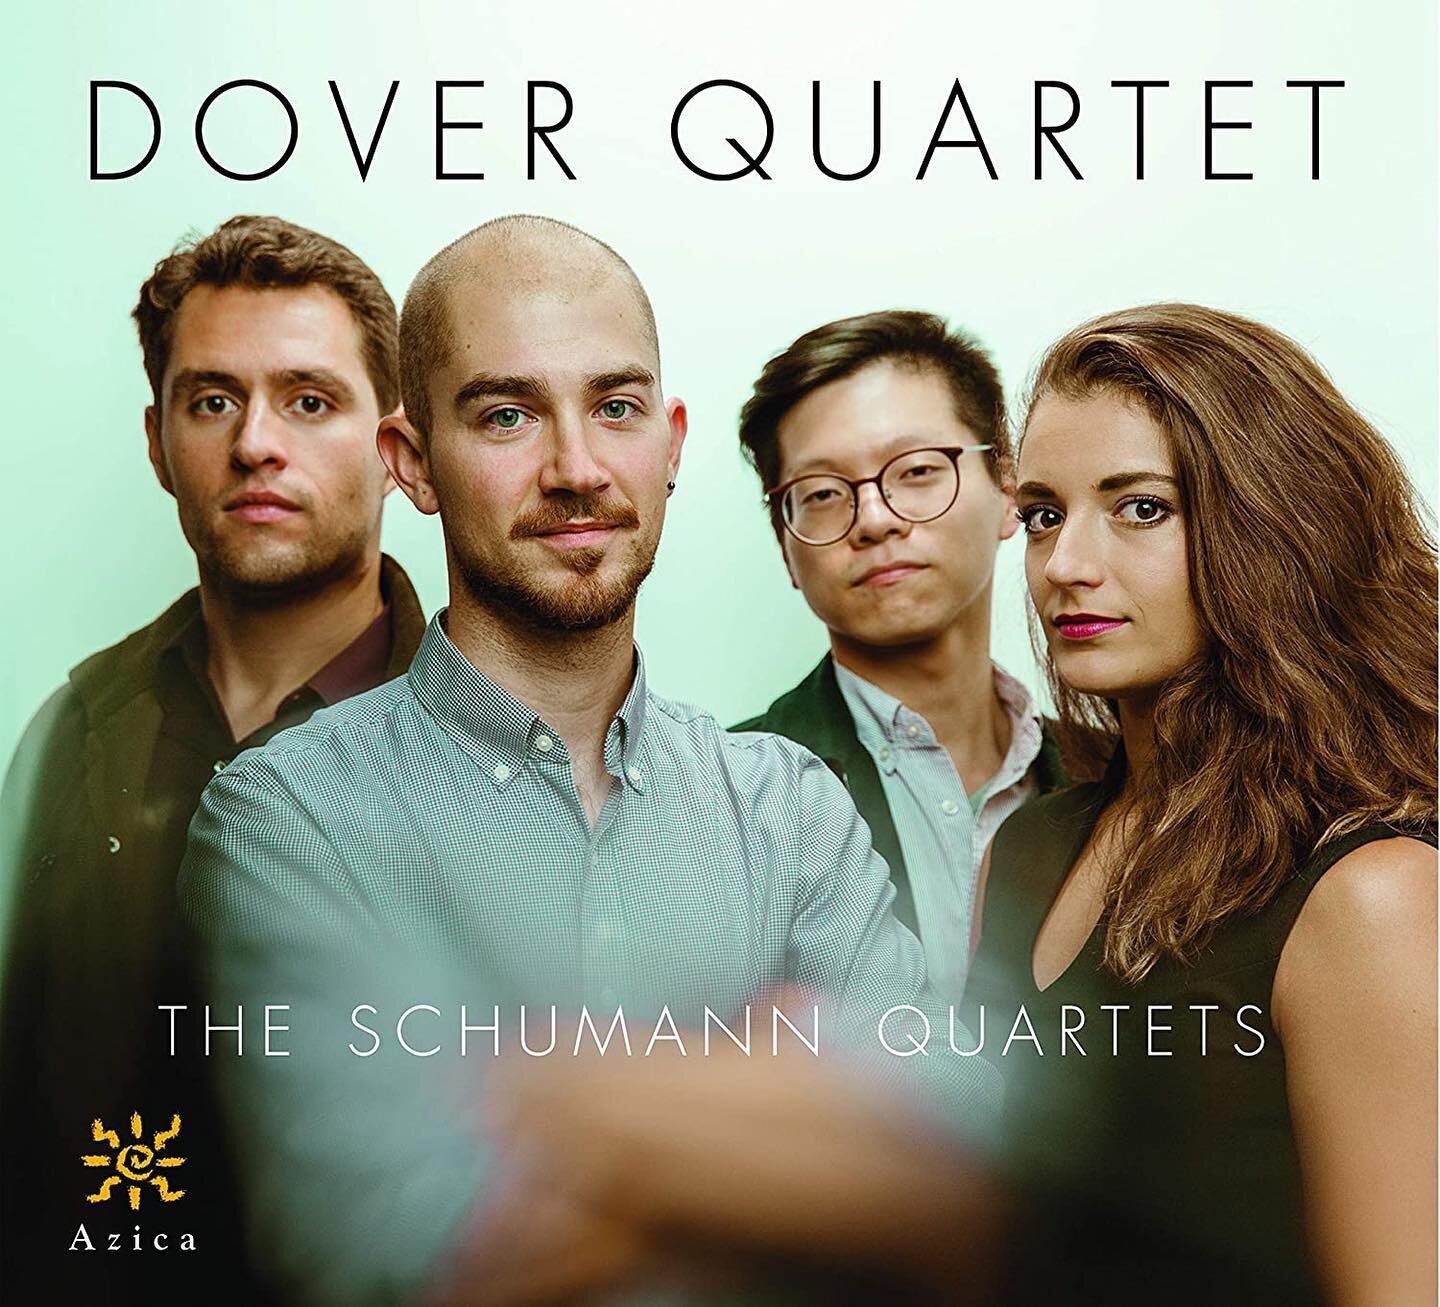 Schumann to tell us you haven&rsquo;t voted yet?? First round voting for Grammys ends this Monday!!! If you&rsquo;re a voter we&rsquo;d love your support this year! 
.
.
.
.
.
.
.
.
#stringquartet #doverquartet #violin #viola #cello #chambermusic #sc